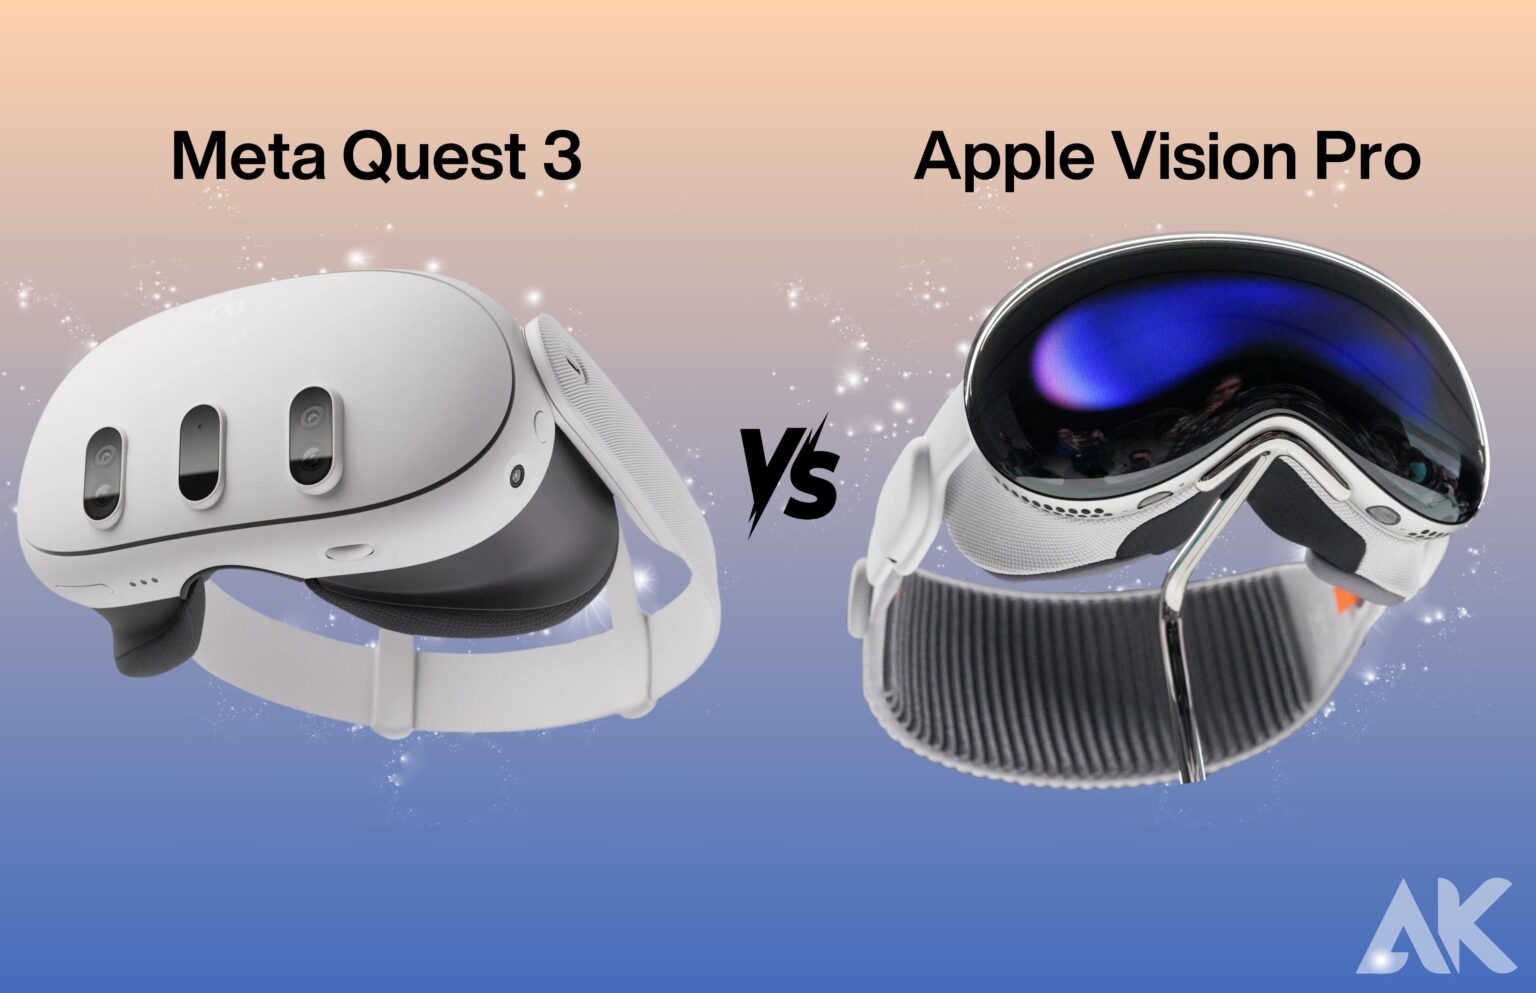 Meta Quest 3 vs. Apple Vision Pro: Which is better for you?